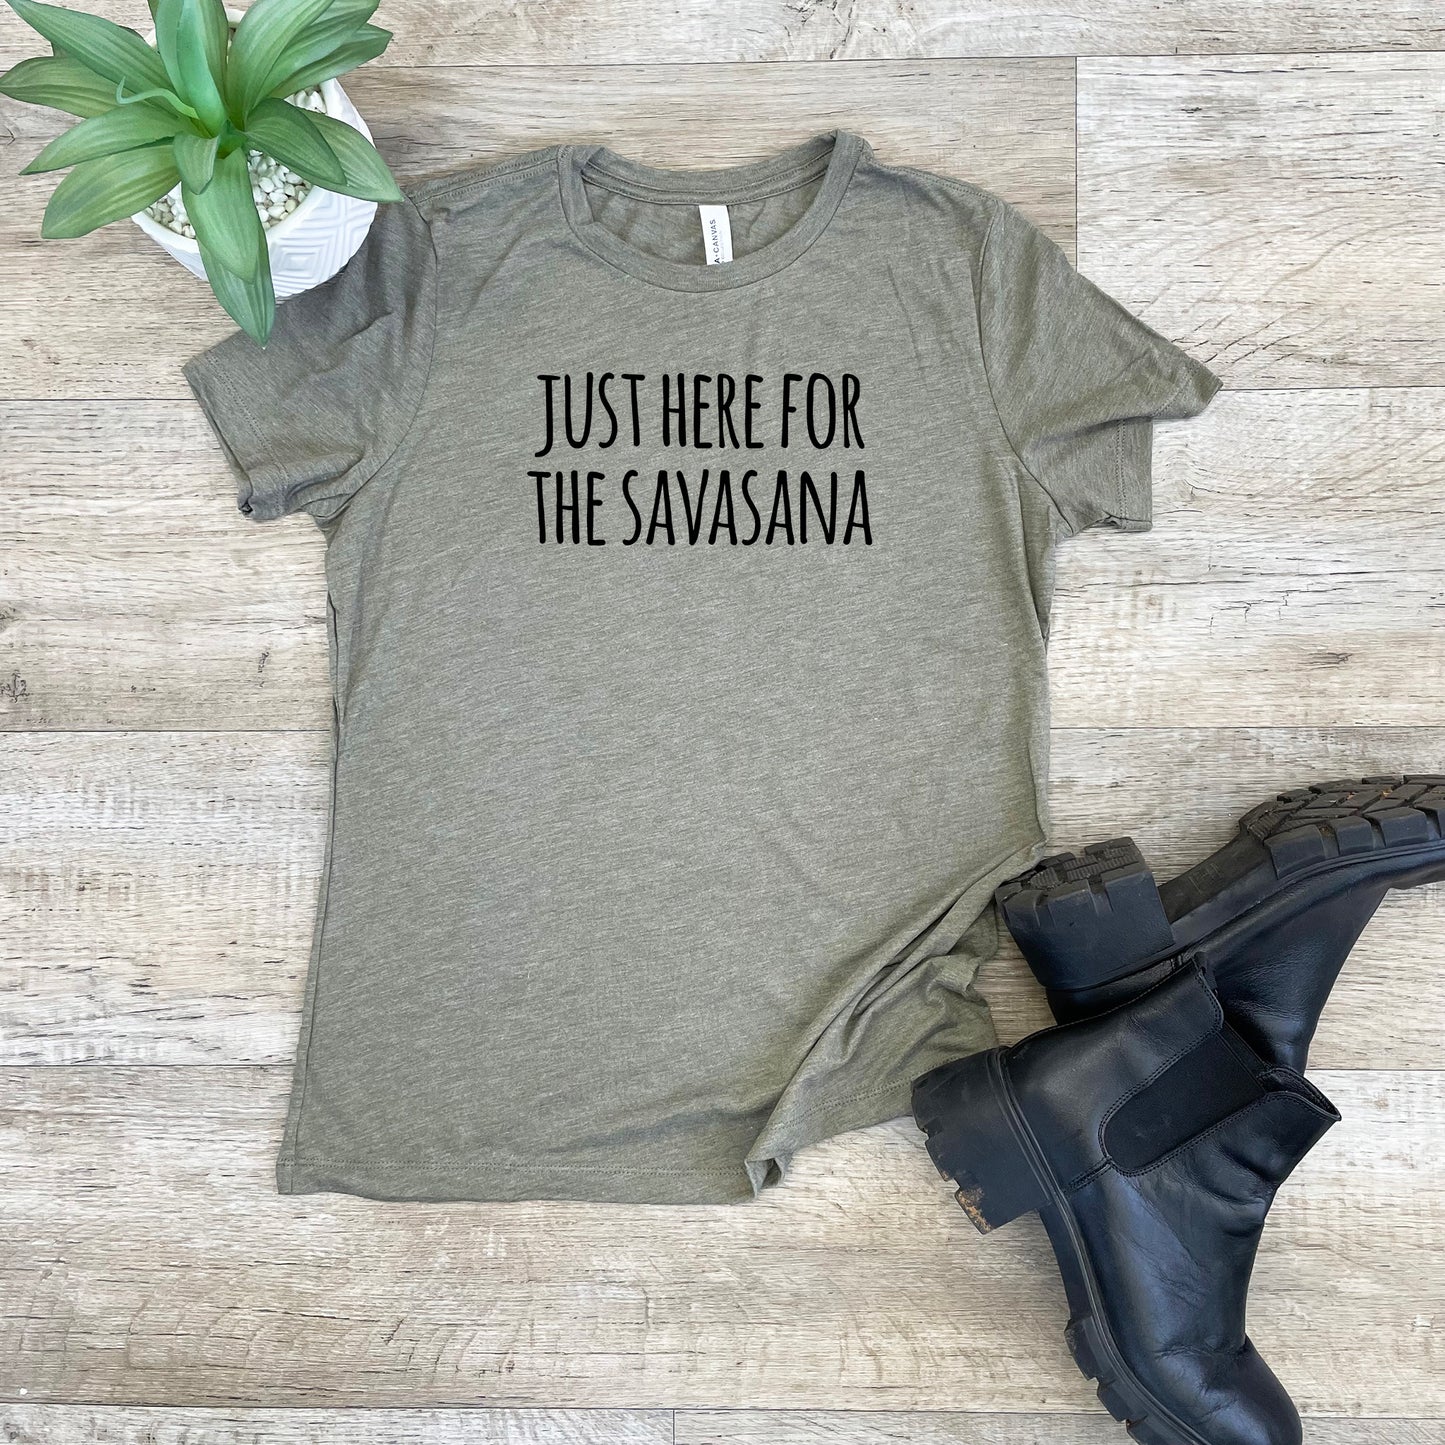 Just Here For The Savasana (Yoga) - Women's Crew Tee - Olive or Dusty Blue